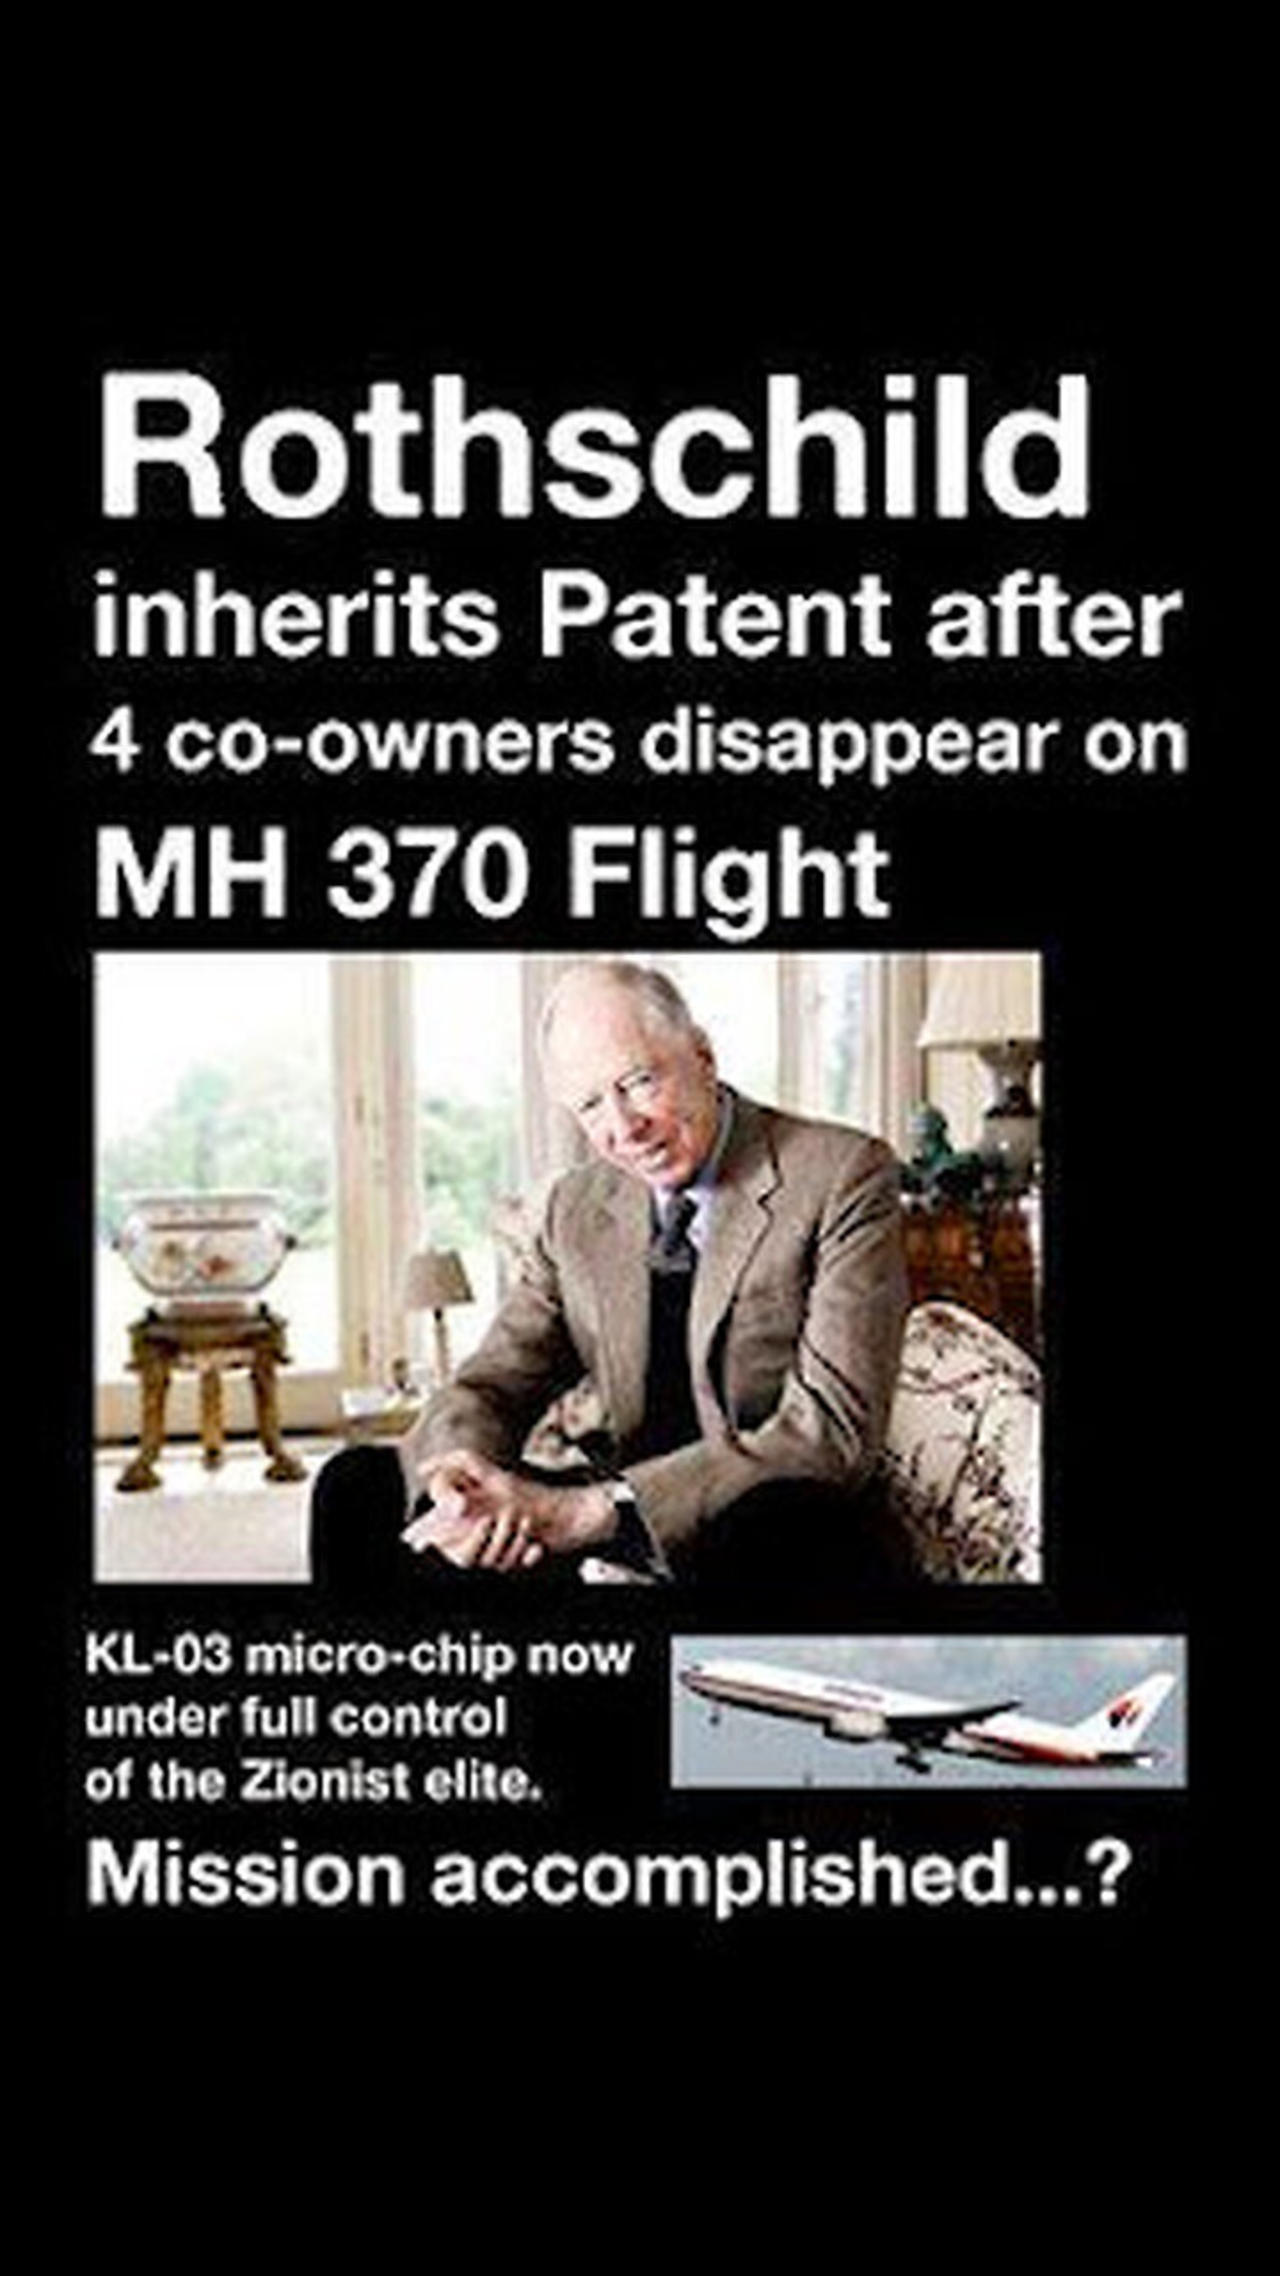 Remember MH-370 crash in 2014 where the 4 dead scientists "Patent" went to Jacob Rothschild?